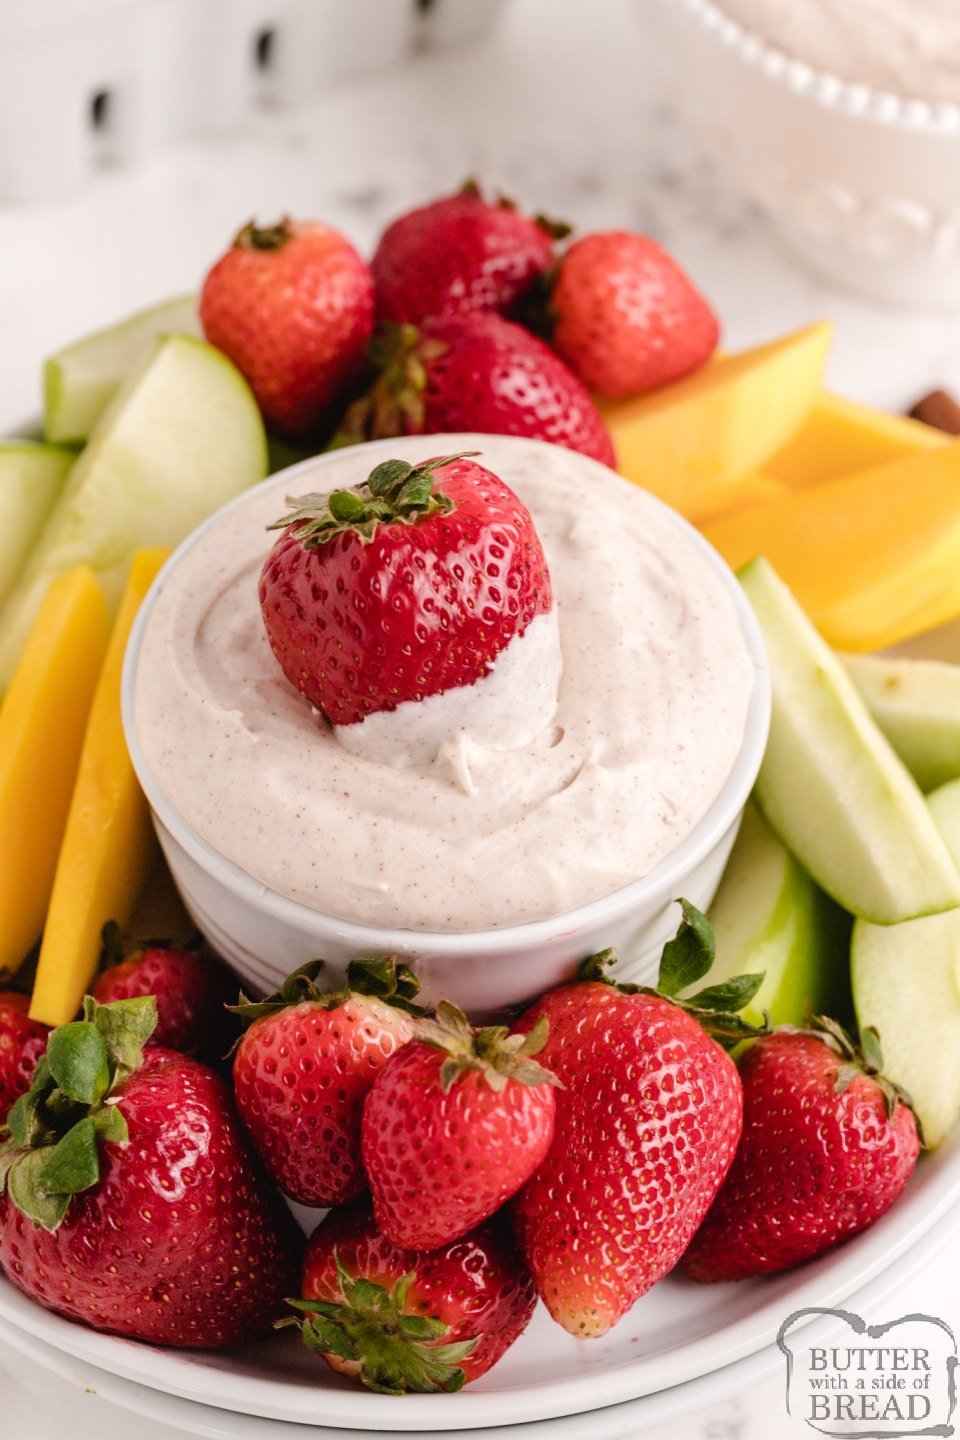 Cream Cheese Fruit Dip made with sweetened cream cheese and lots of flavor that pairs perfectly with fresh fruit. Creamy fruit dip recipe that can be made in less than 5 minutes!